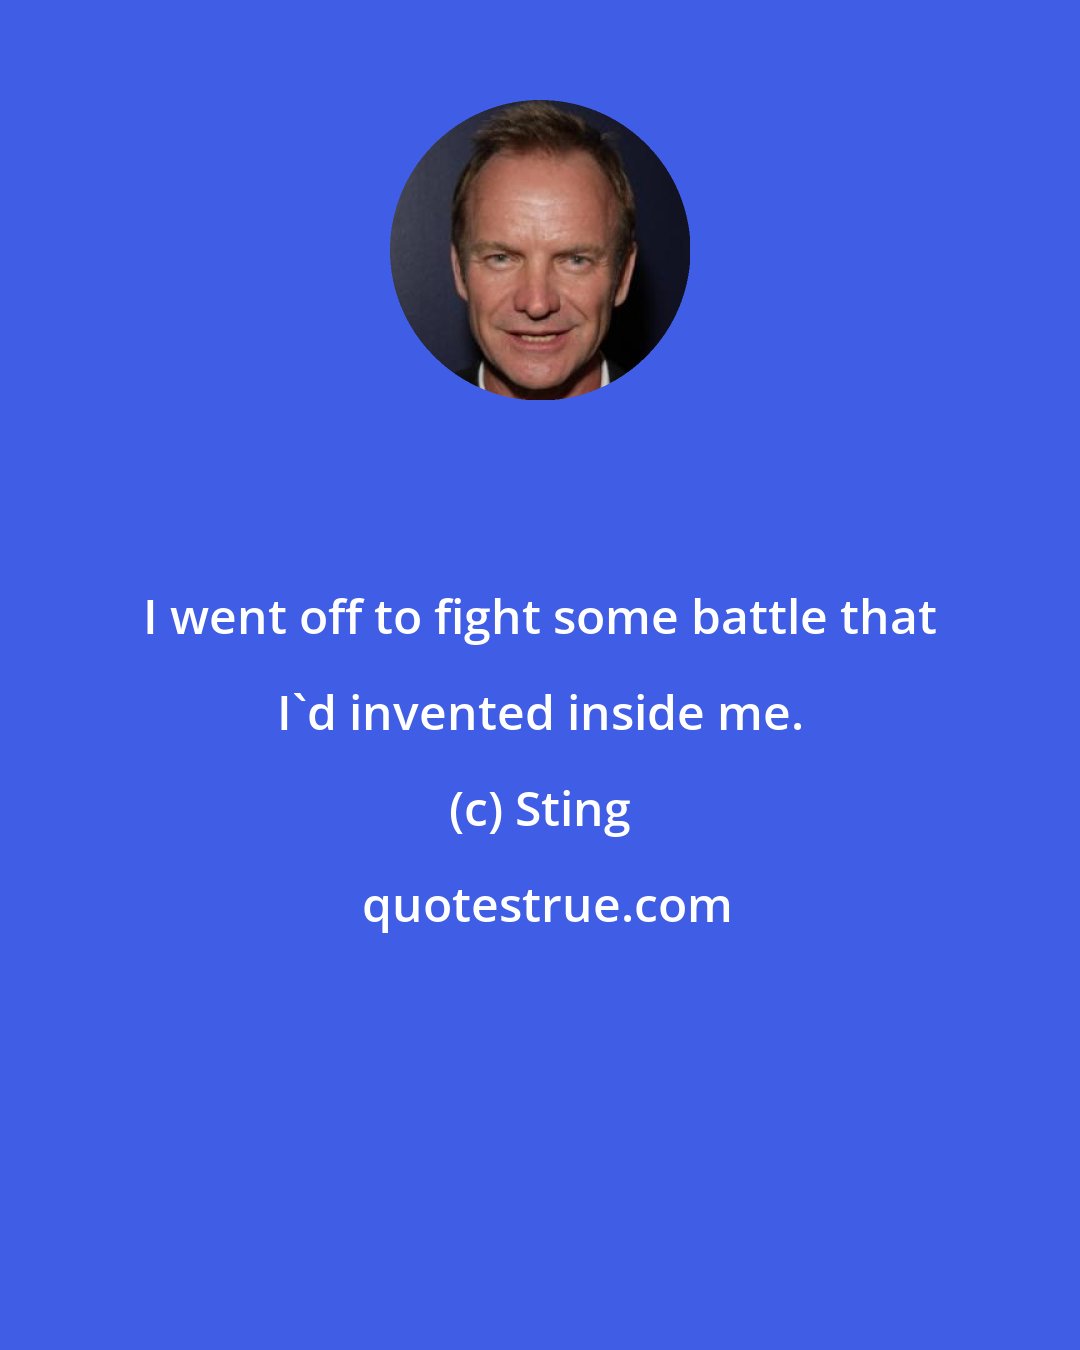 Sting: I went off to fight some battle that I'd invented inside me.